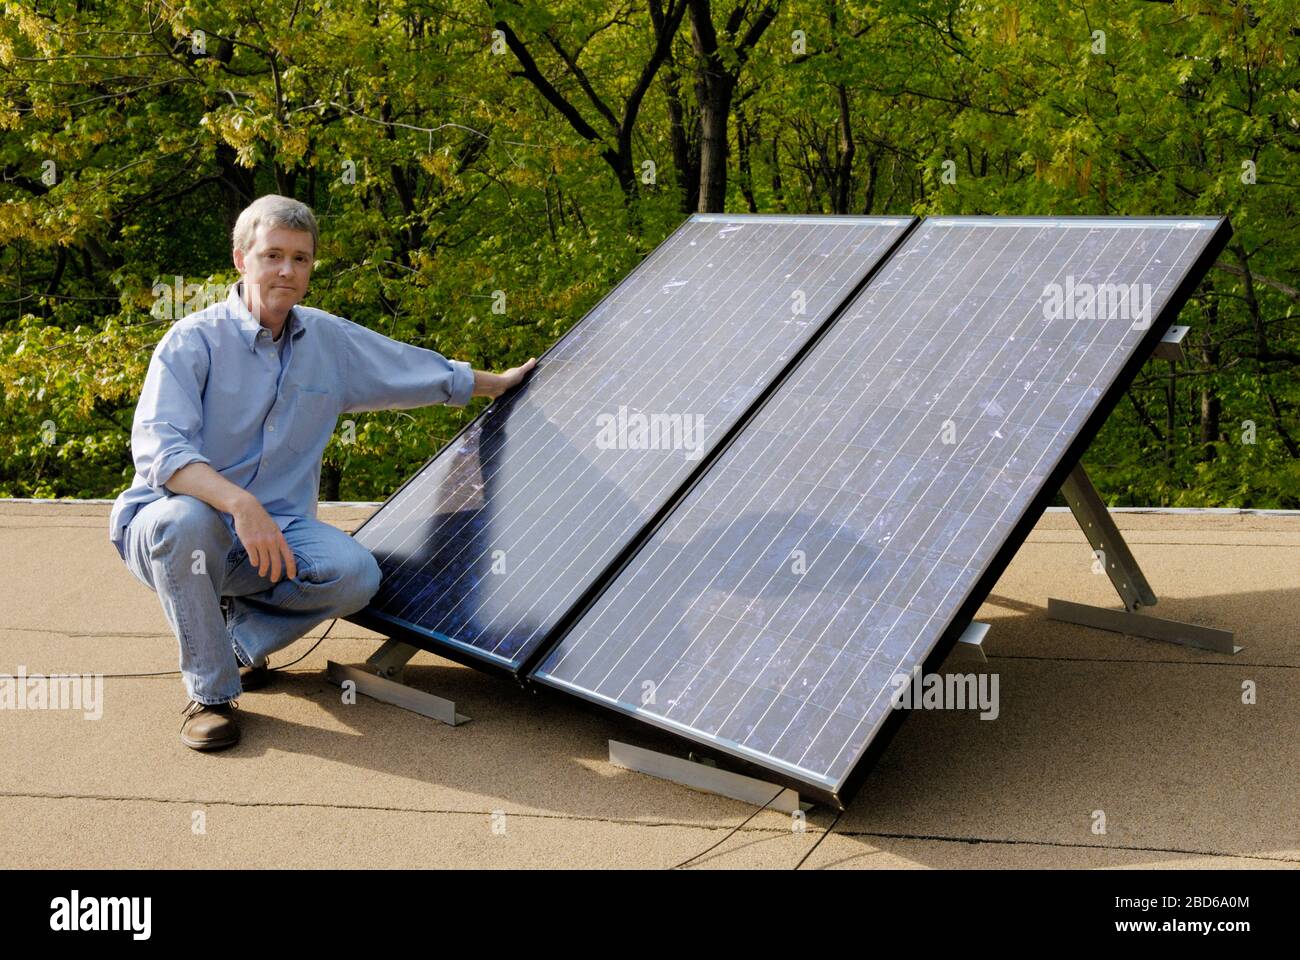 Man with solar panels on roof of house Stock Photo